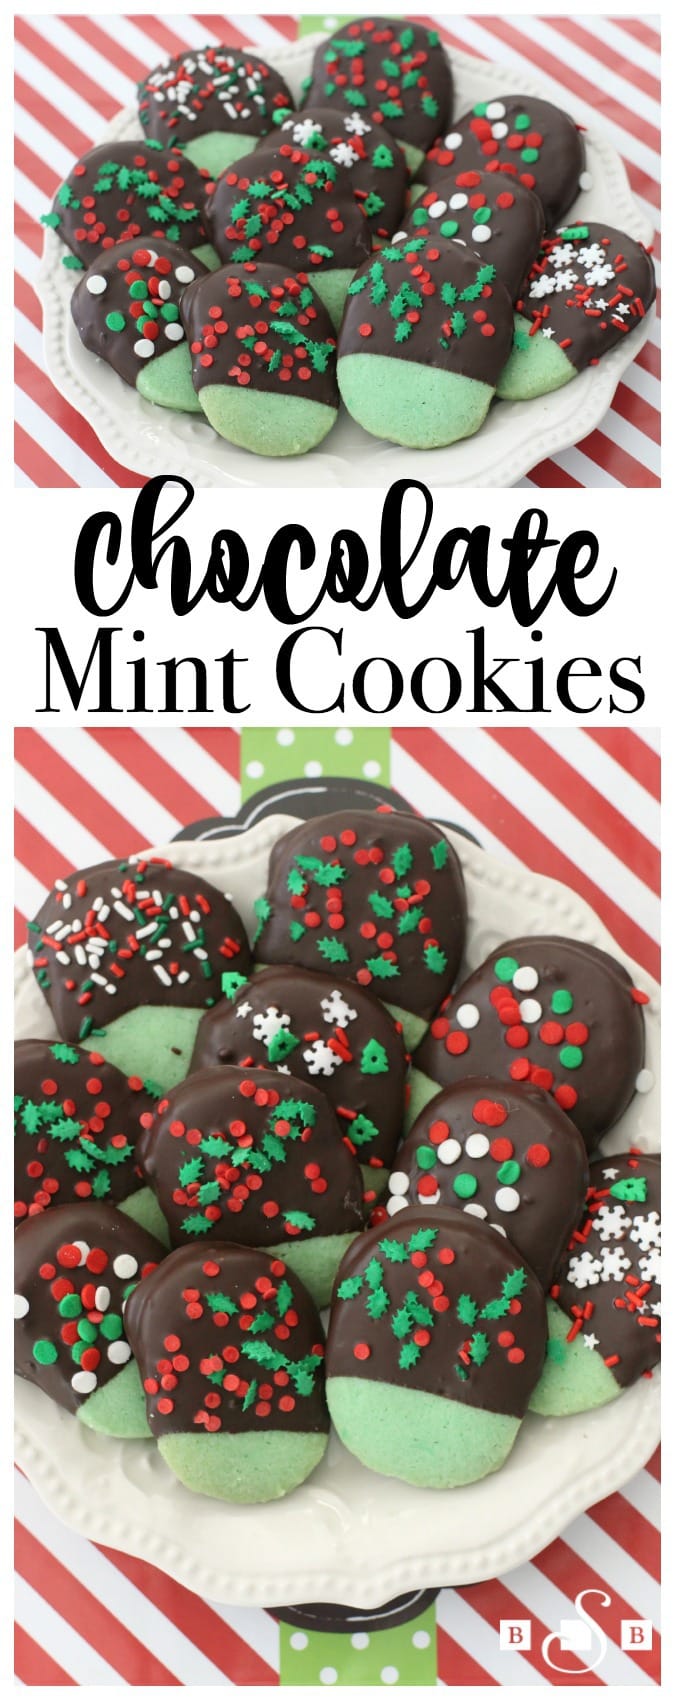 Chocolate Mint Cookies made from a buttery #mint shortbread cookie dipped in dark chocolate & topped with festive holiday sprinkles. My favorite Christmas cookie! 